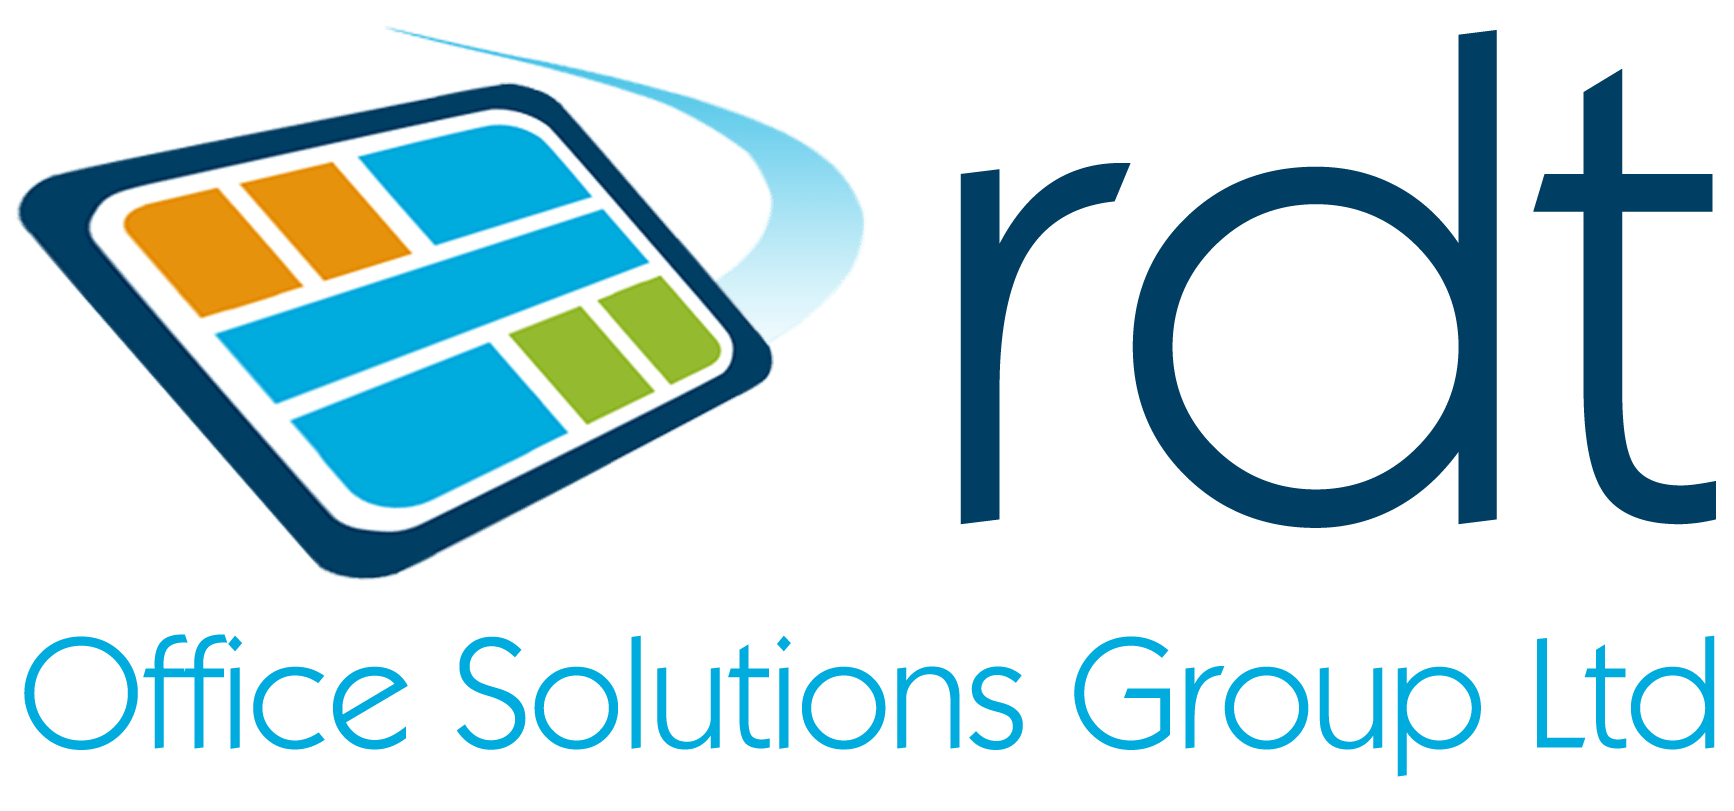 RDT Logo - RDT Competitors, Revenue and Employees Company Profile